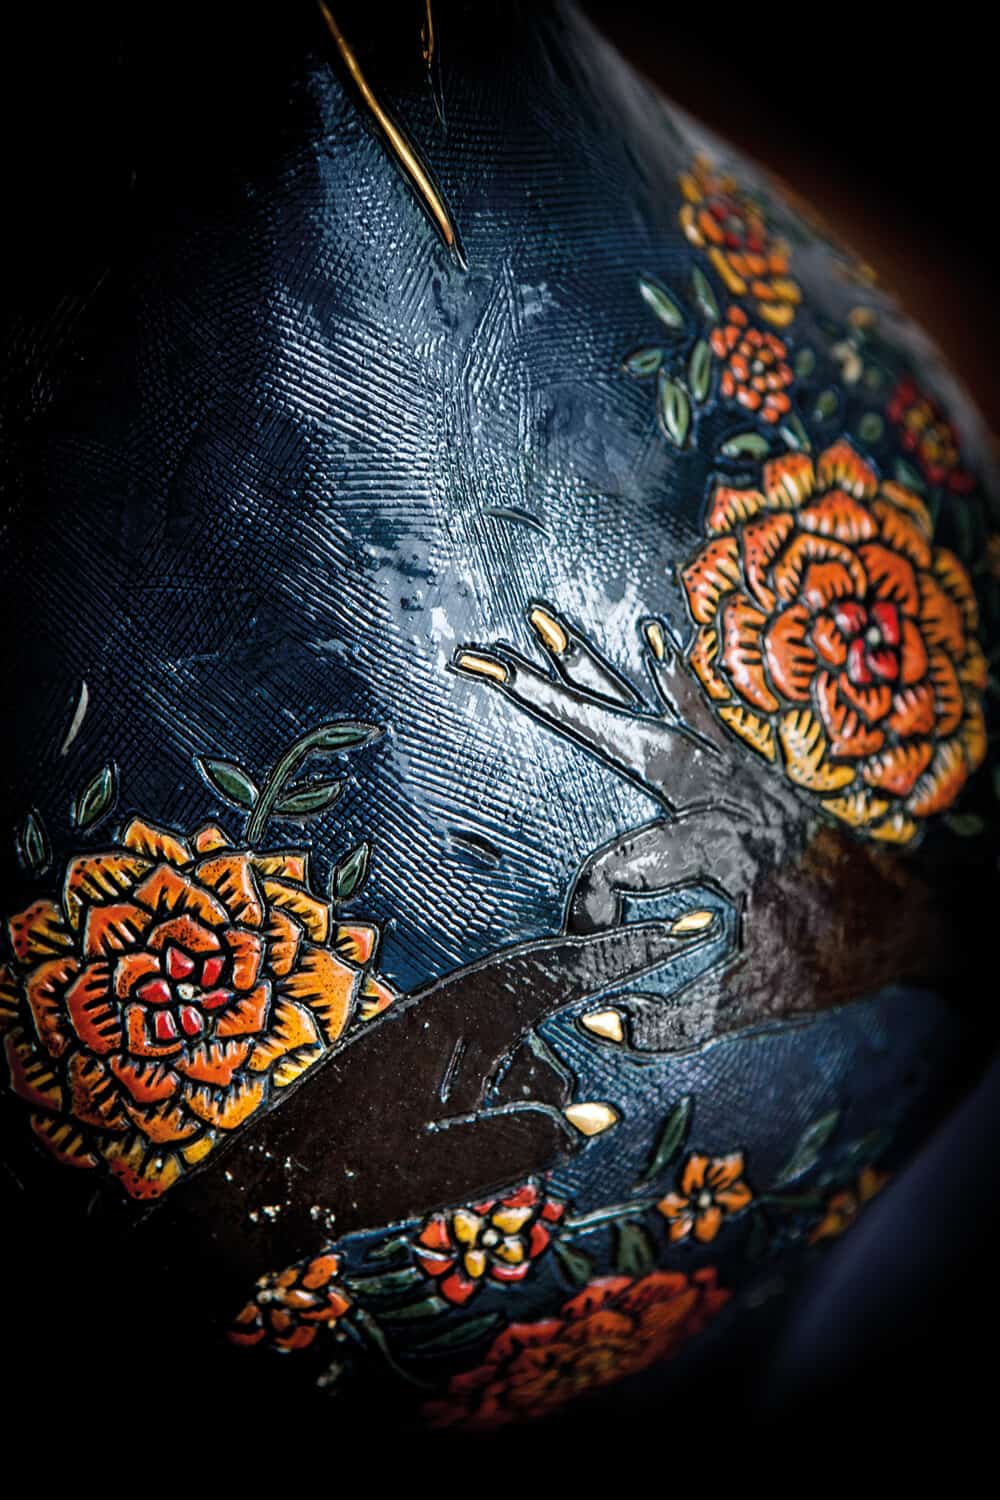 Lucinda Mudge, Getting fucked repeatedly by life (detail). Ceramic vase. Courtesy of the artist & Everard Read CIRCA Gallery.